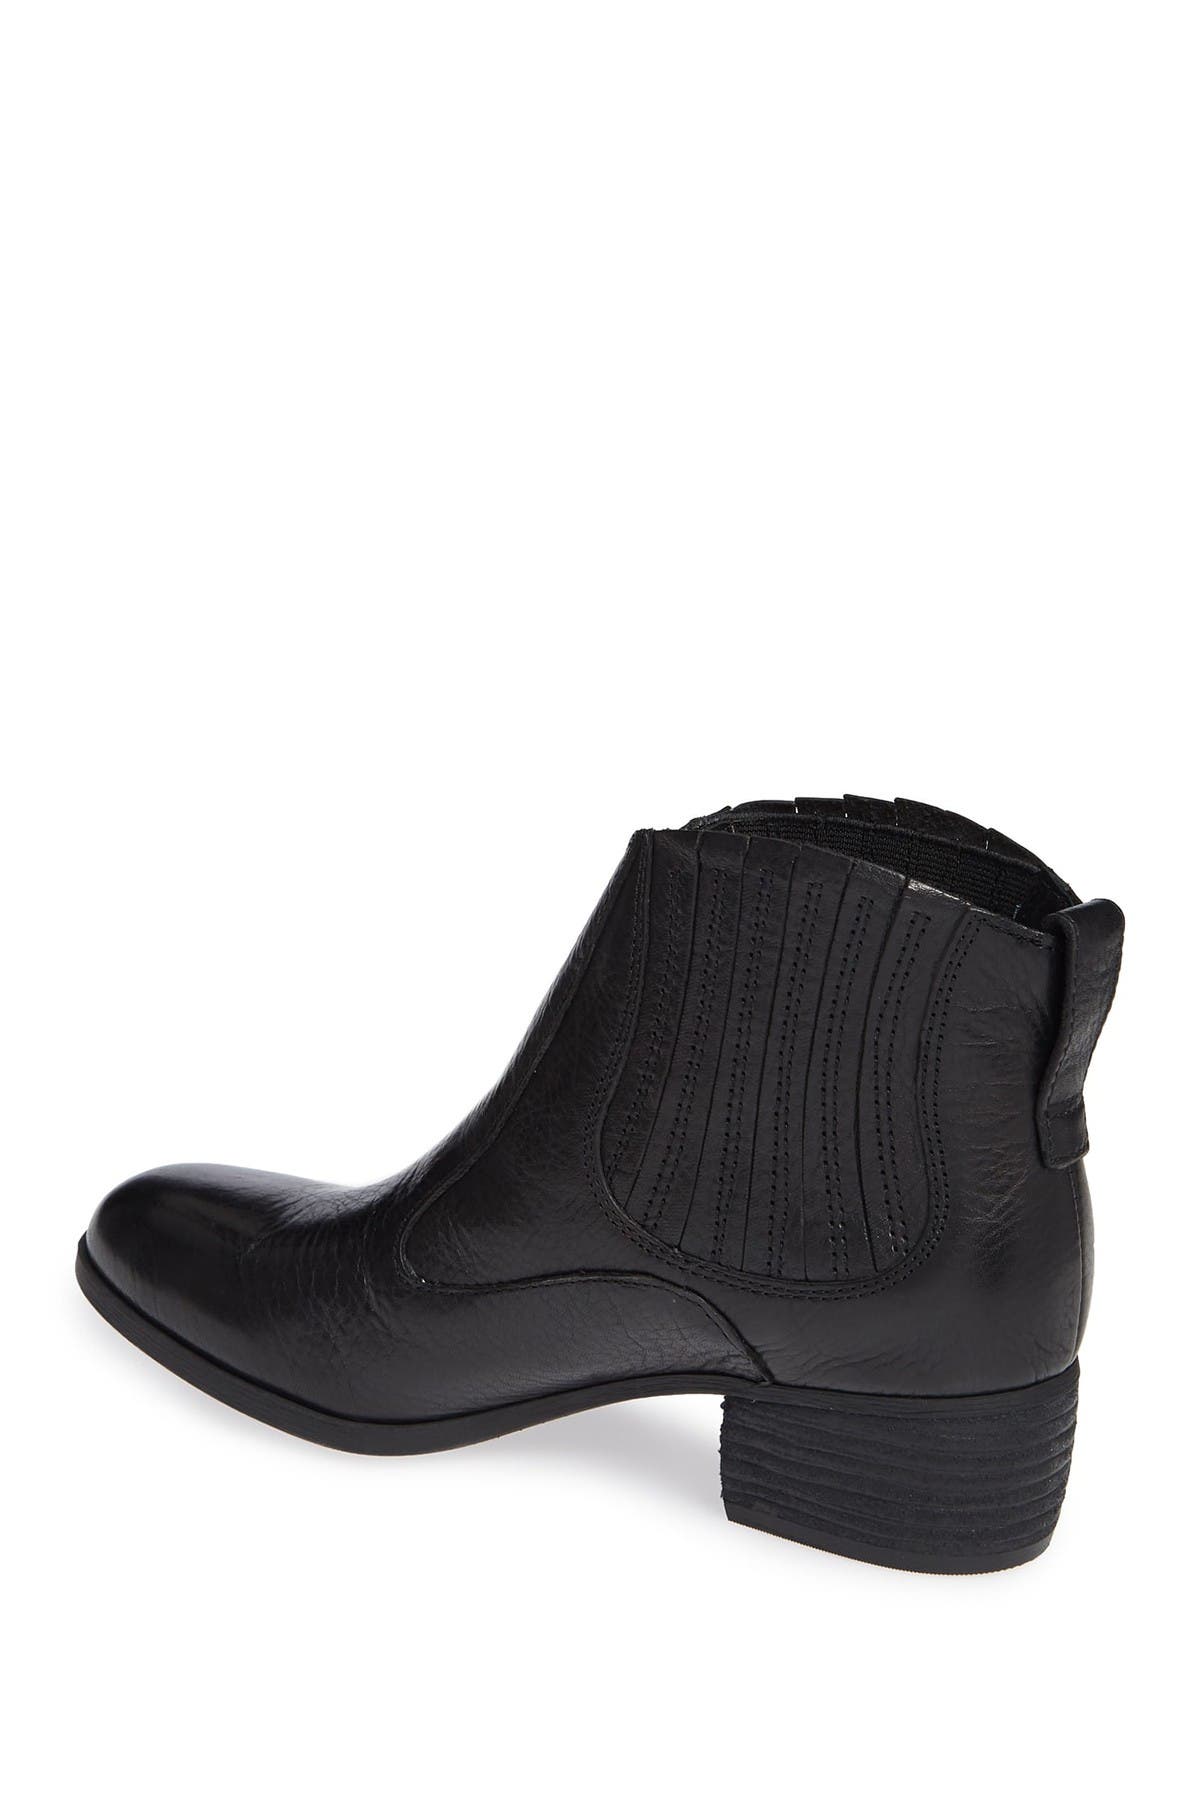 sofft cellina bootie